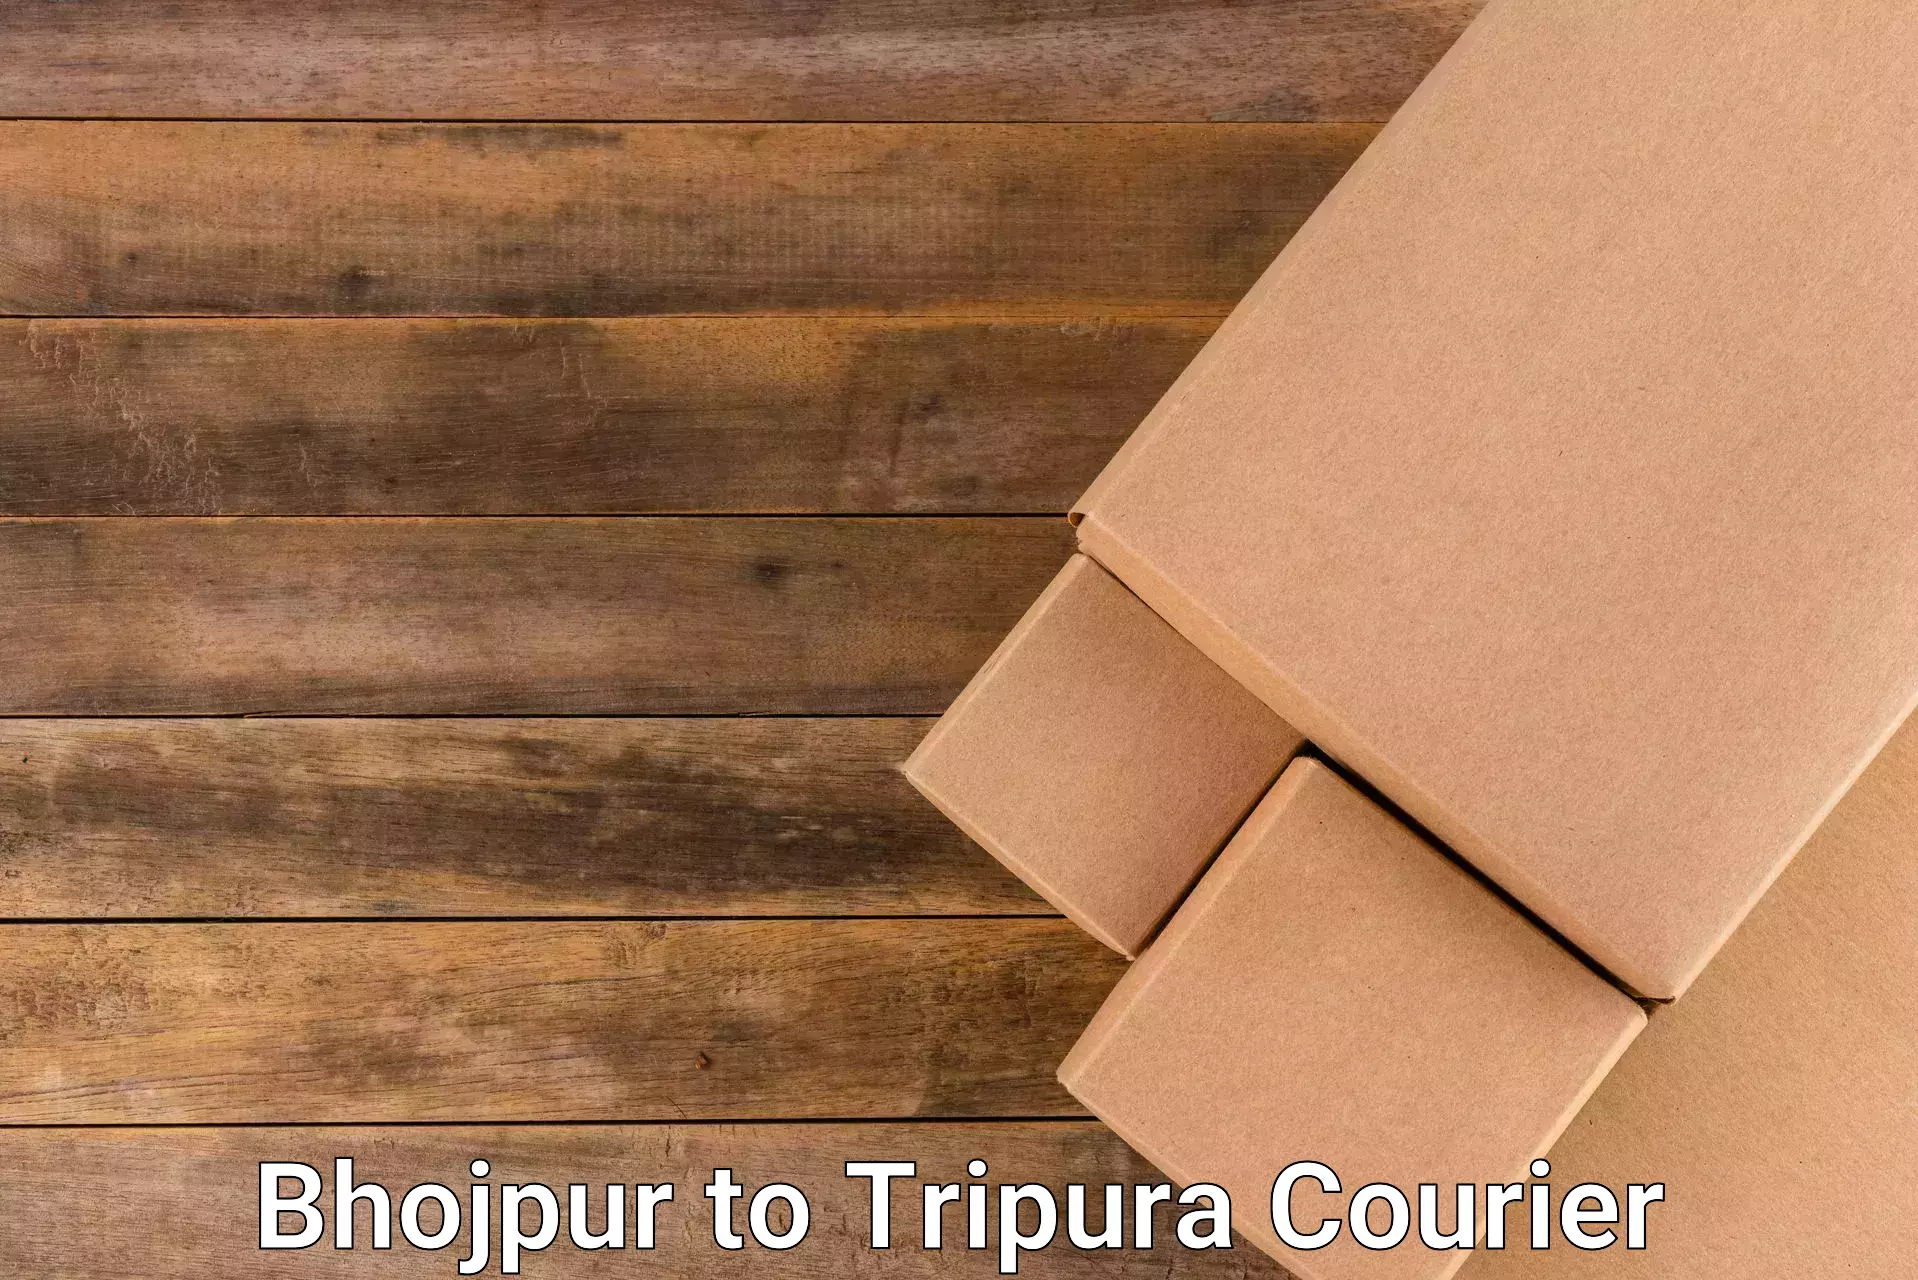 Express courier capabilities Bhojpur to Udaipur Tripura